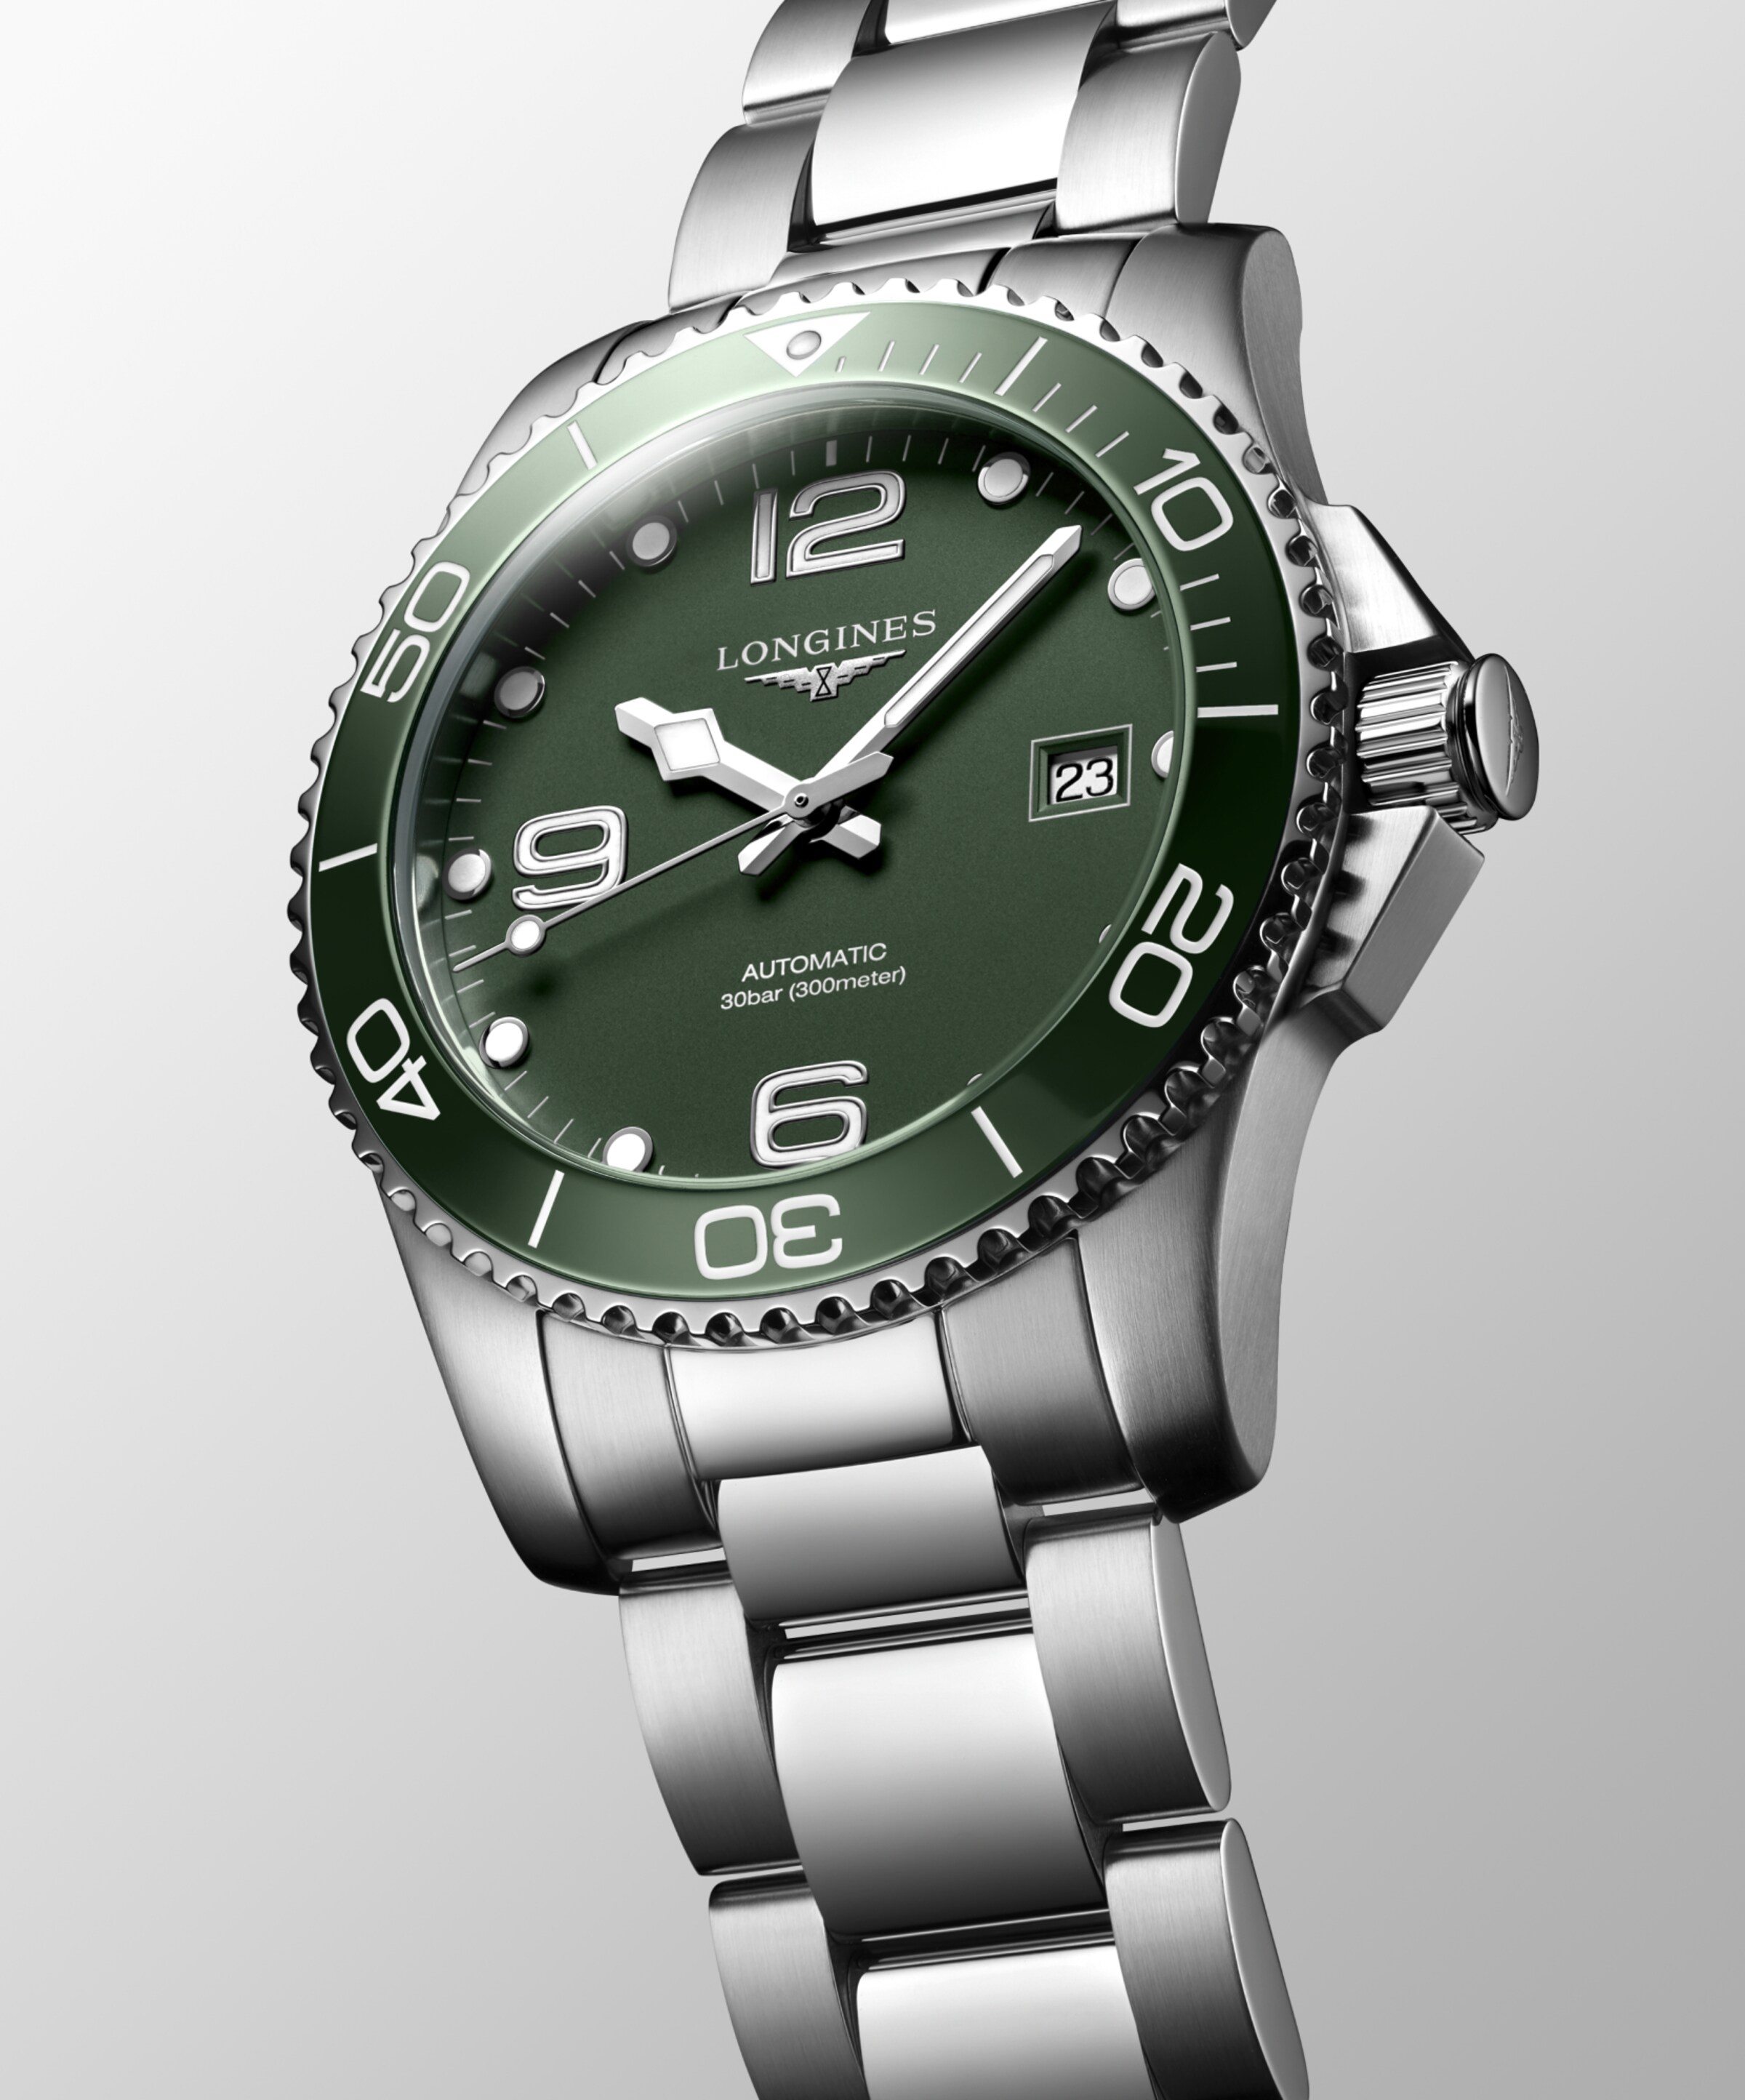 Longines HYDROCONQUEST Automatic Stainless steel and ceramic bezel Watch - L3.781.4.06.6